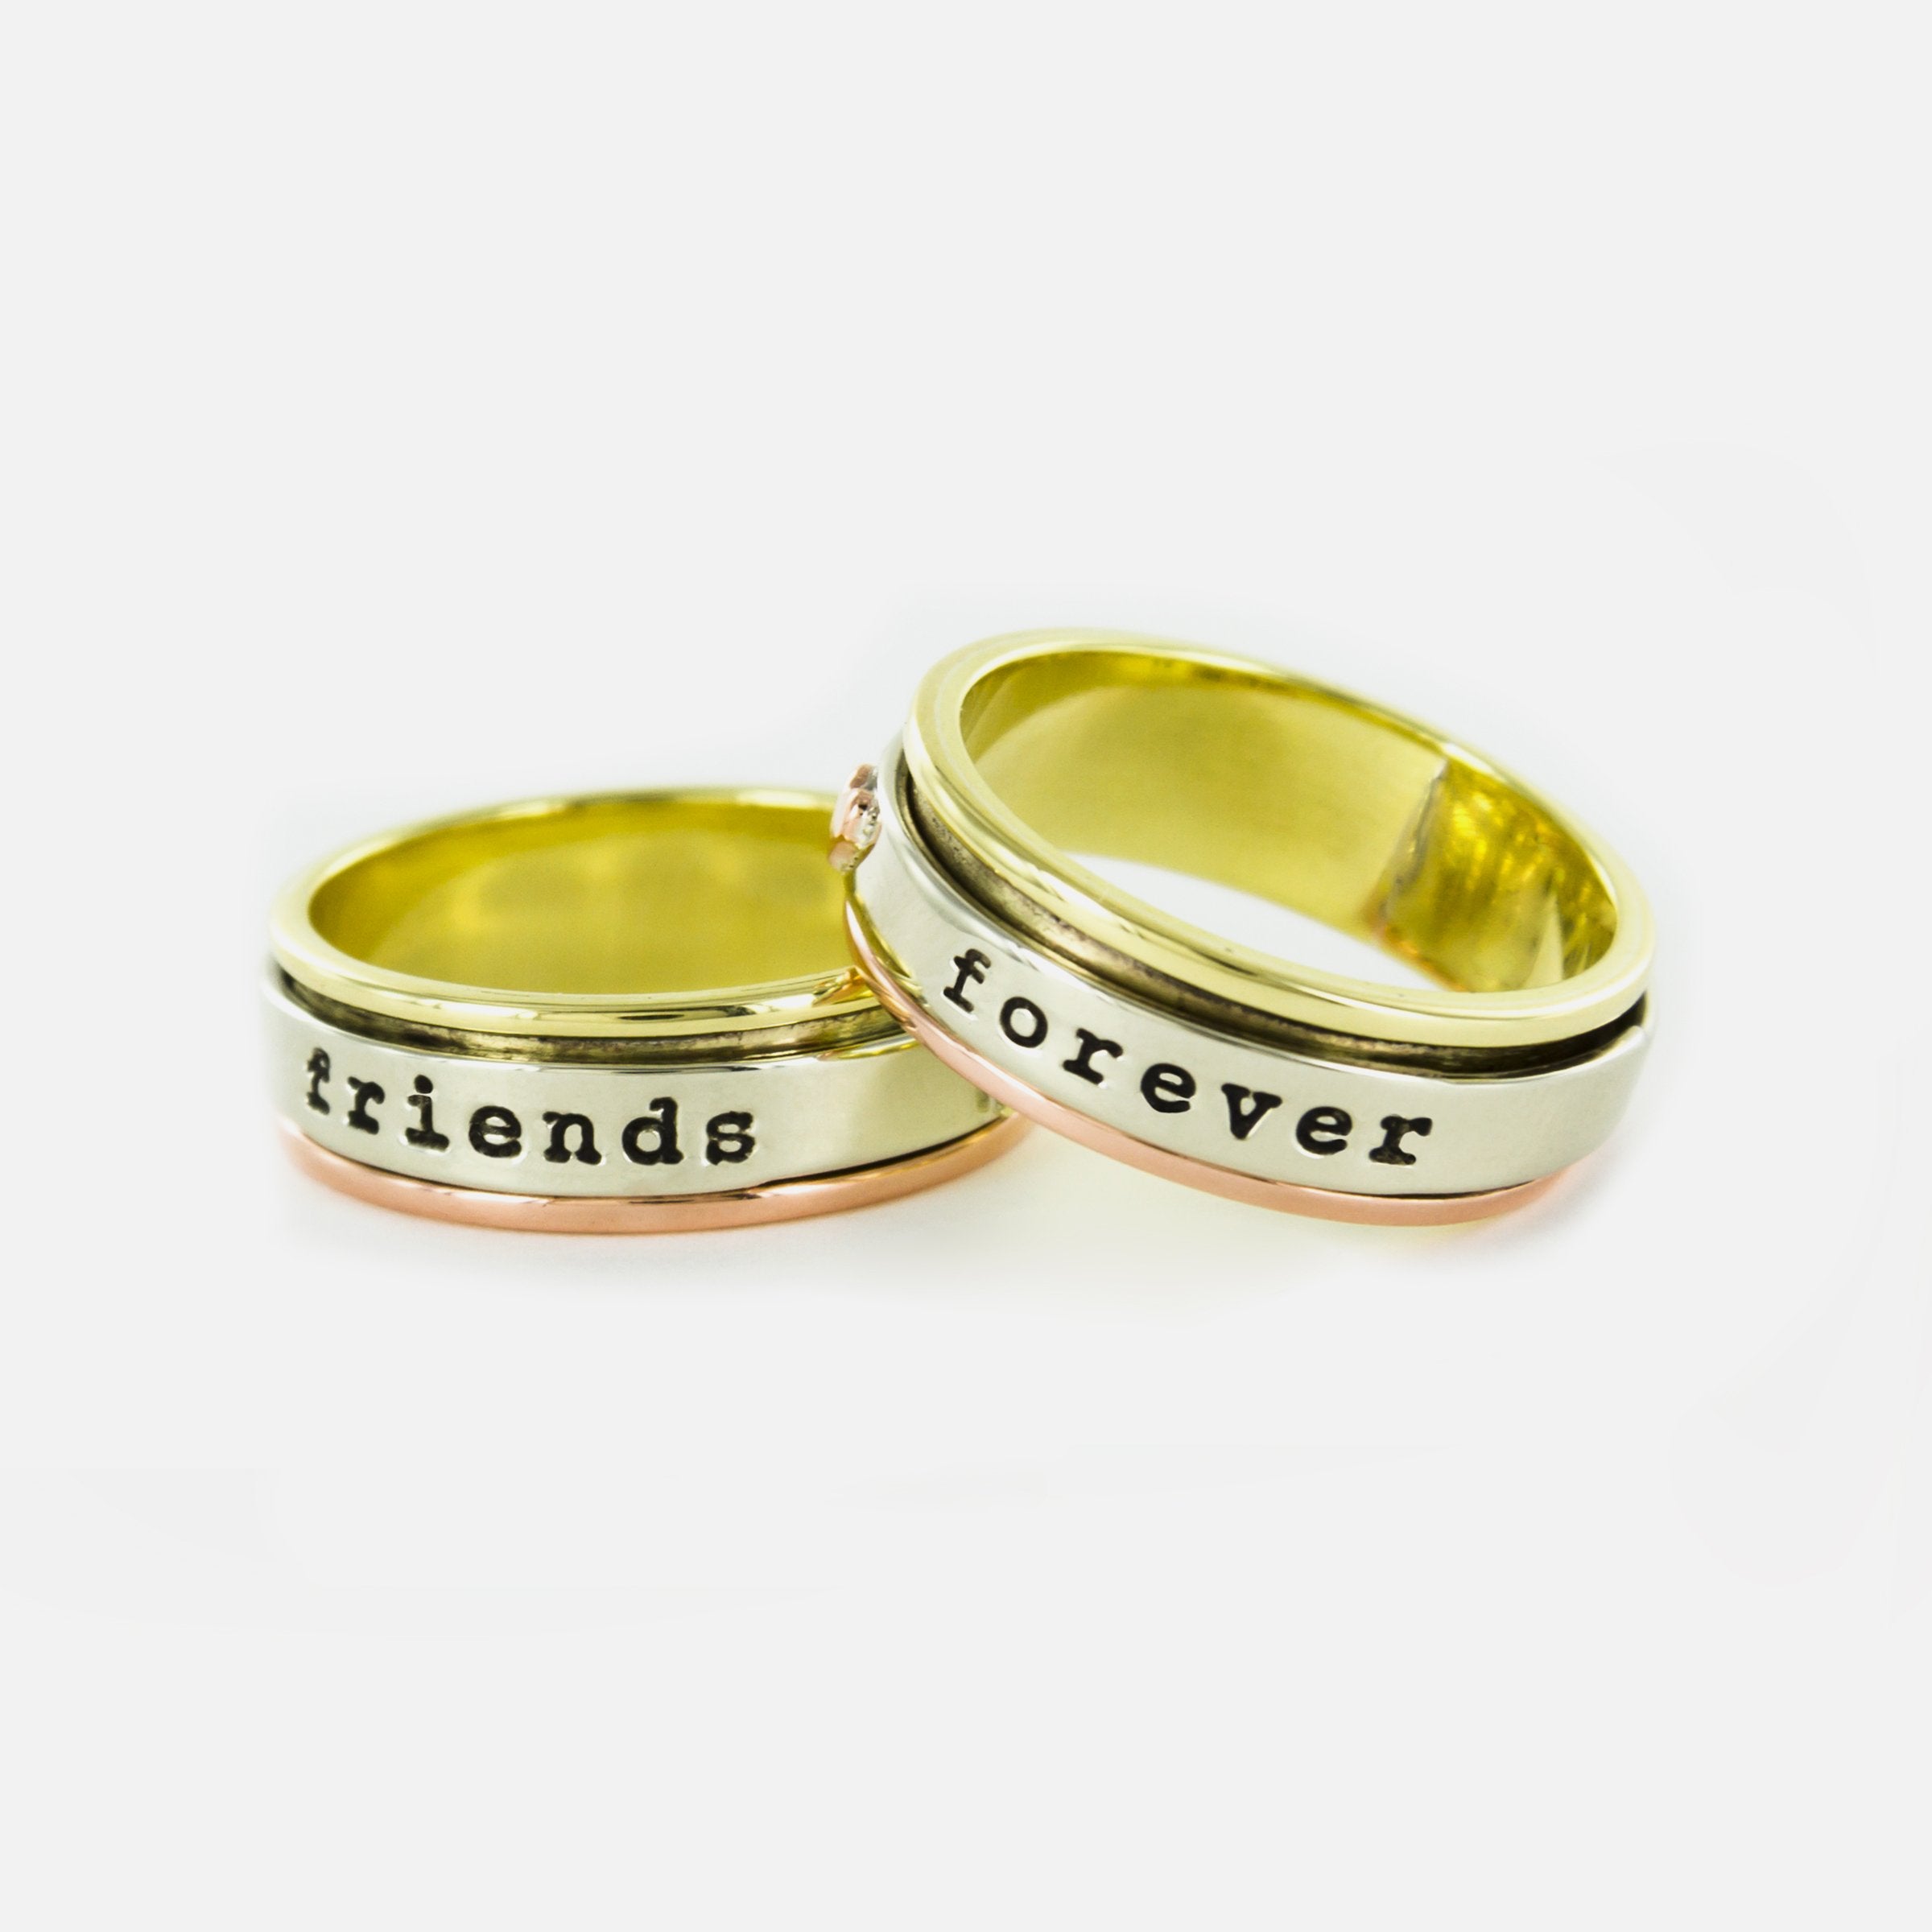 Friends Forever Mixed Metals Spinning Ring - 6